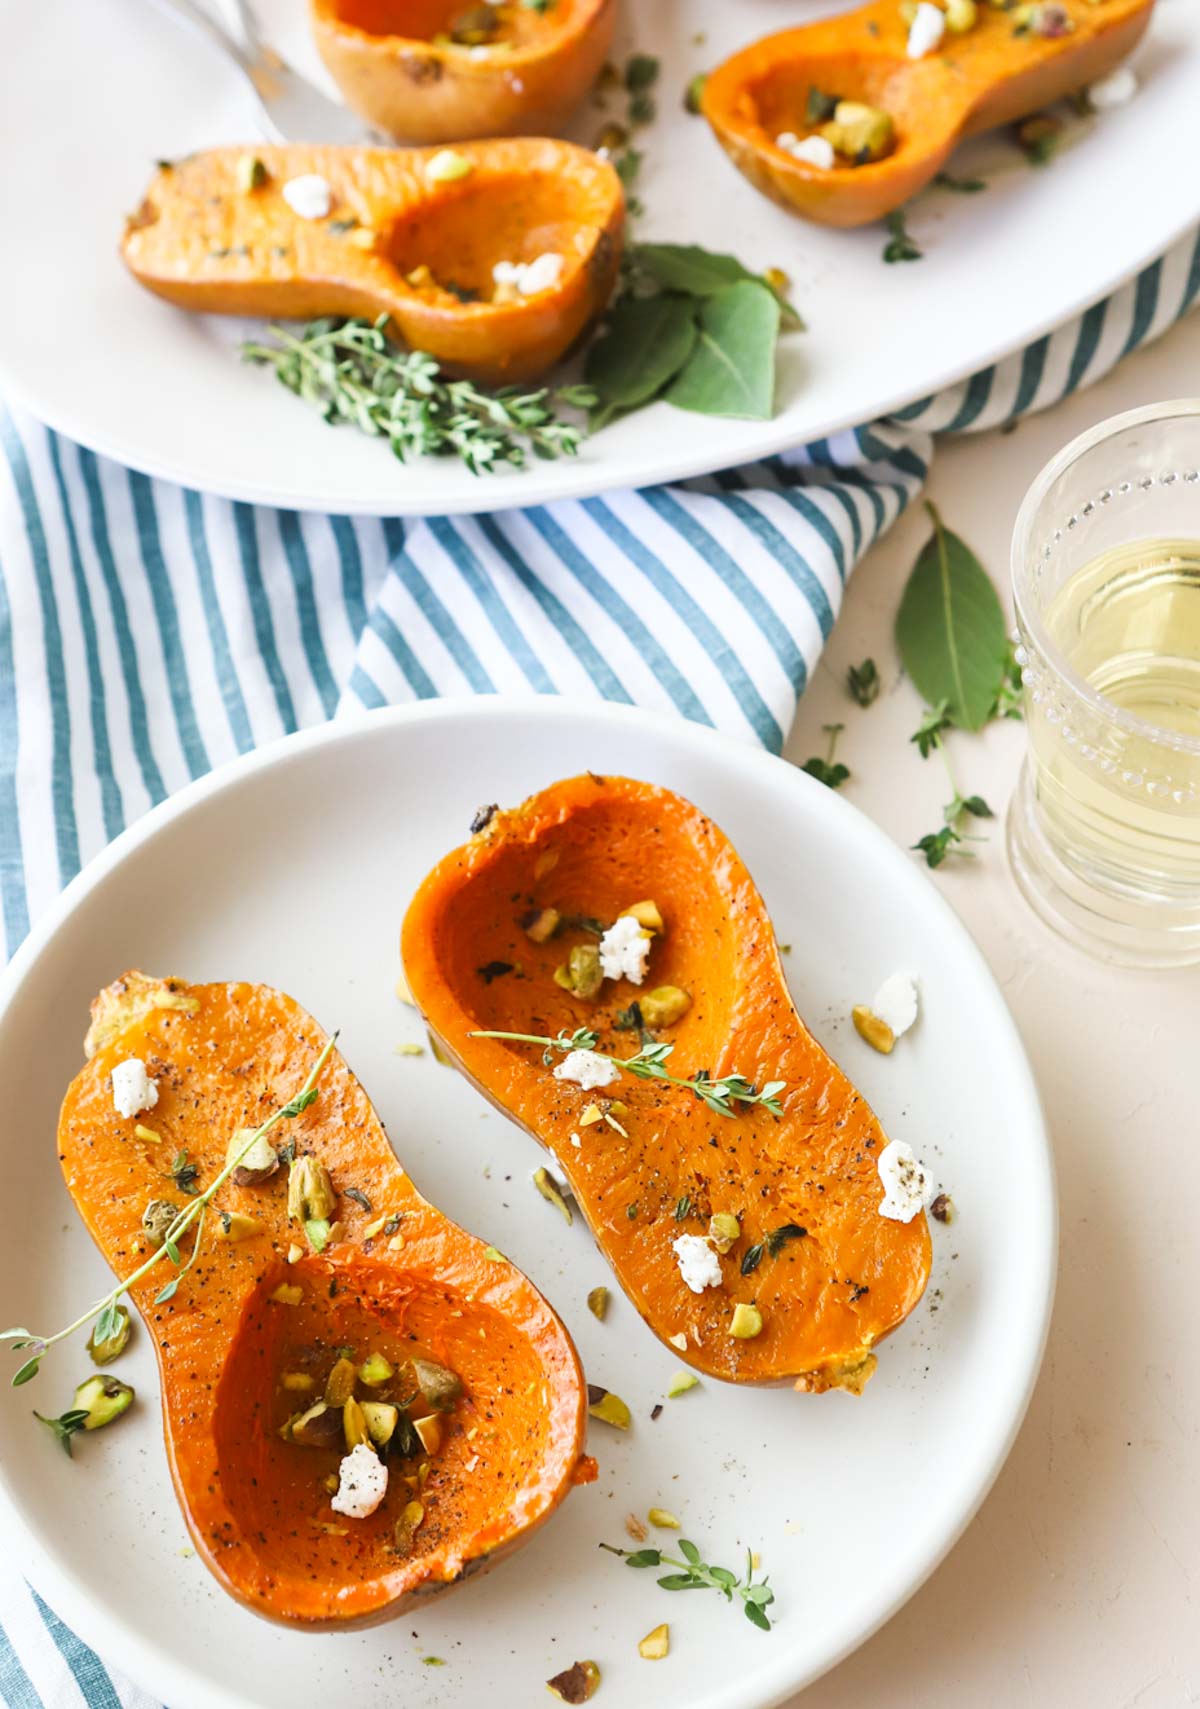 honeynut squash that has been roasted and placed on a white platter and garnished with goat cheese and fresh thyme